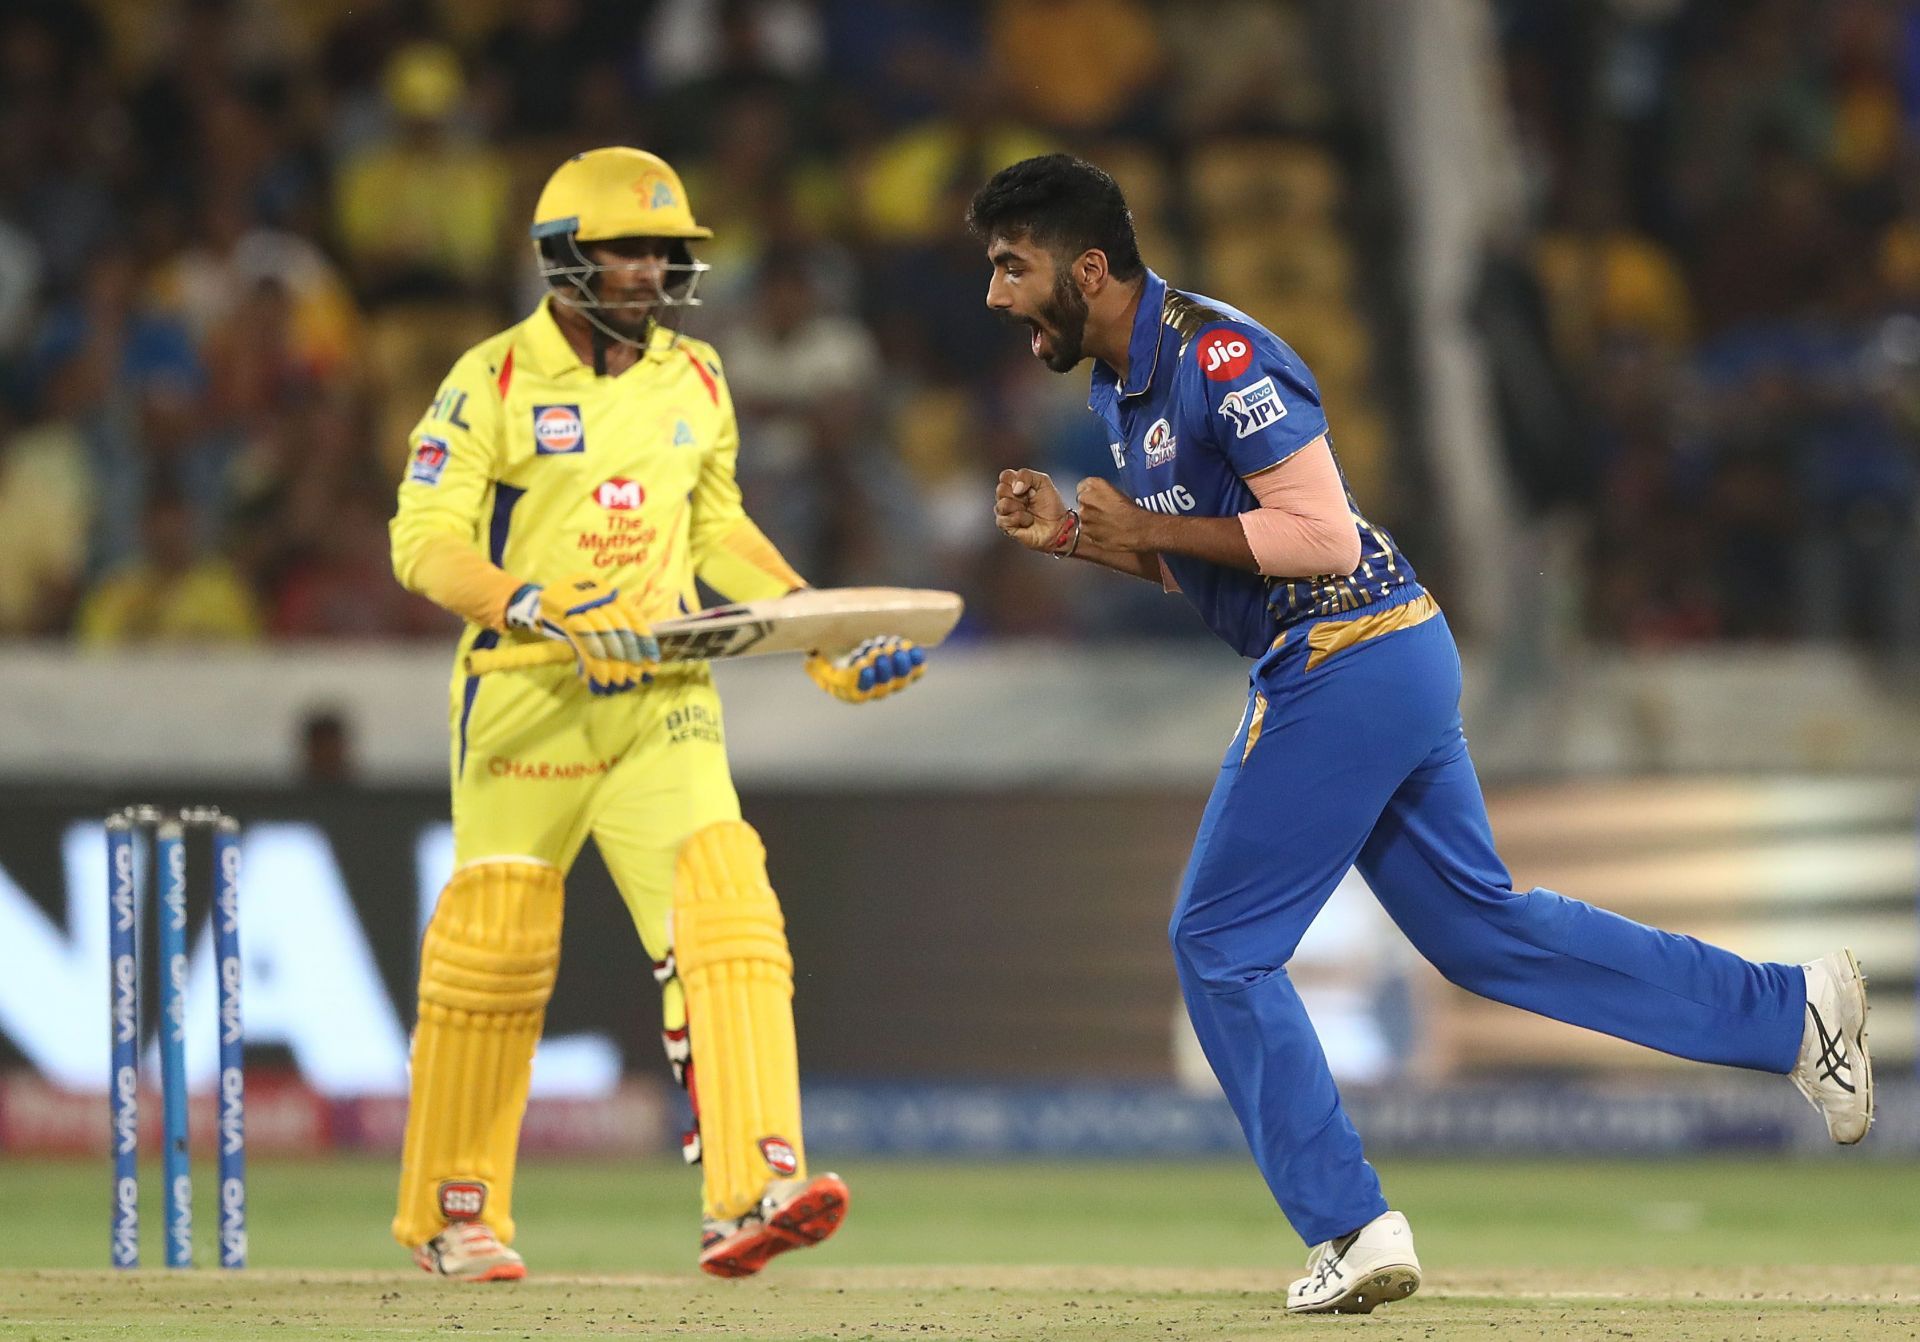 Jasprit Bumrah is expected to lead the Mumbai Indians seam attack.